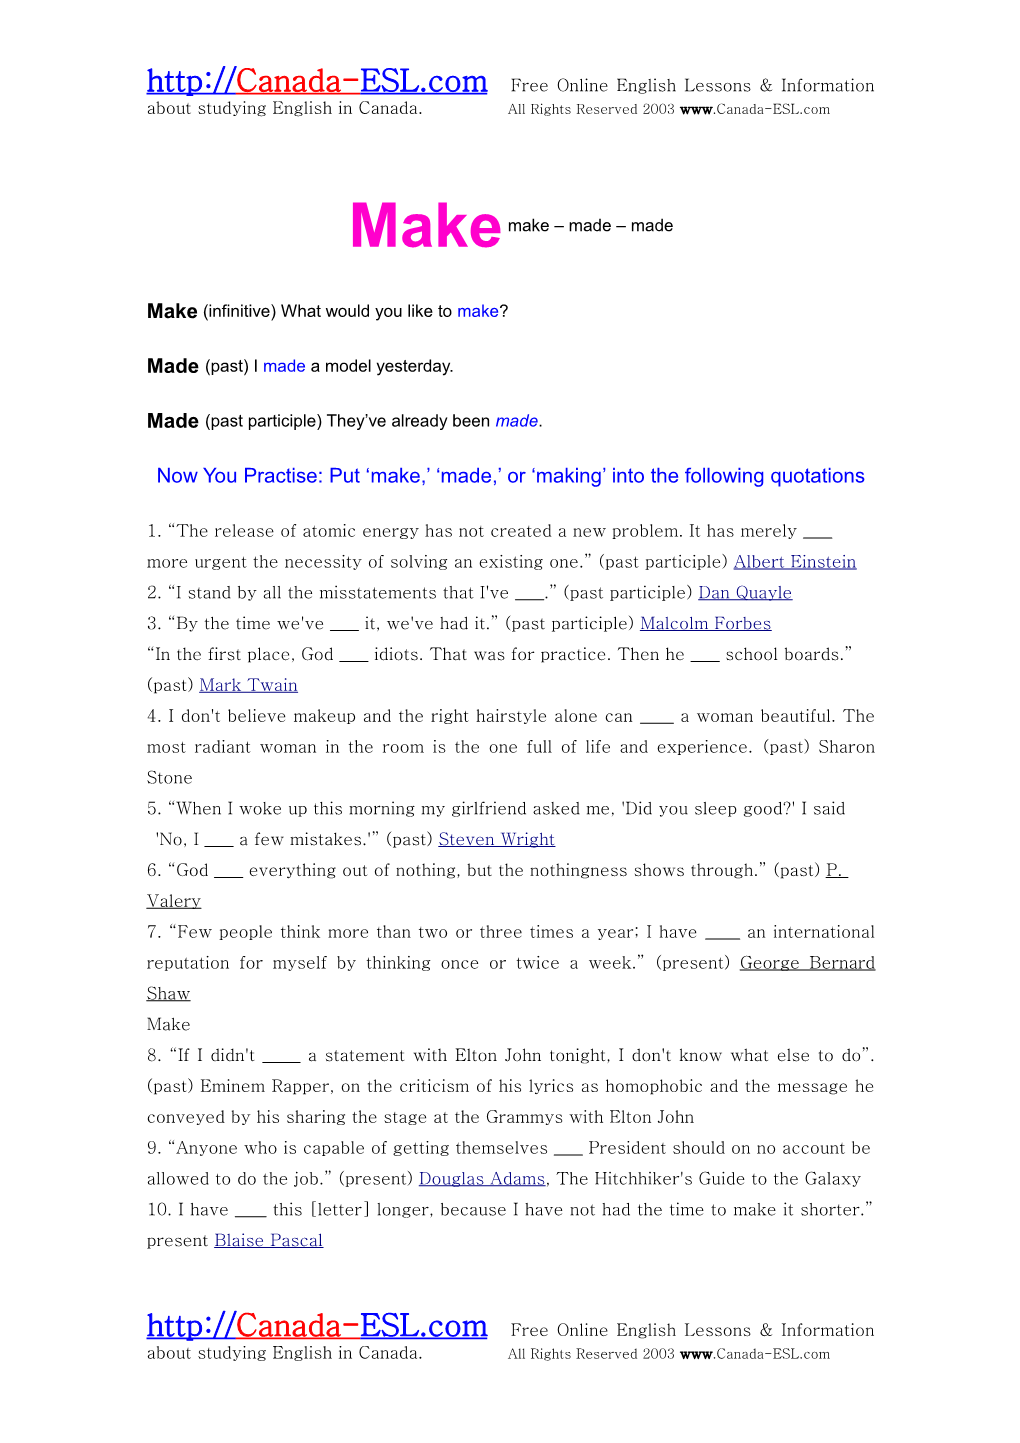 Make (Infinitive) What Would You Like to Make?